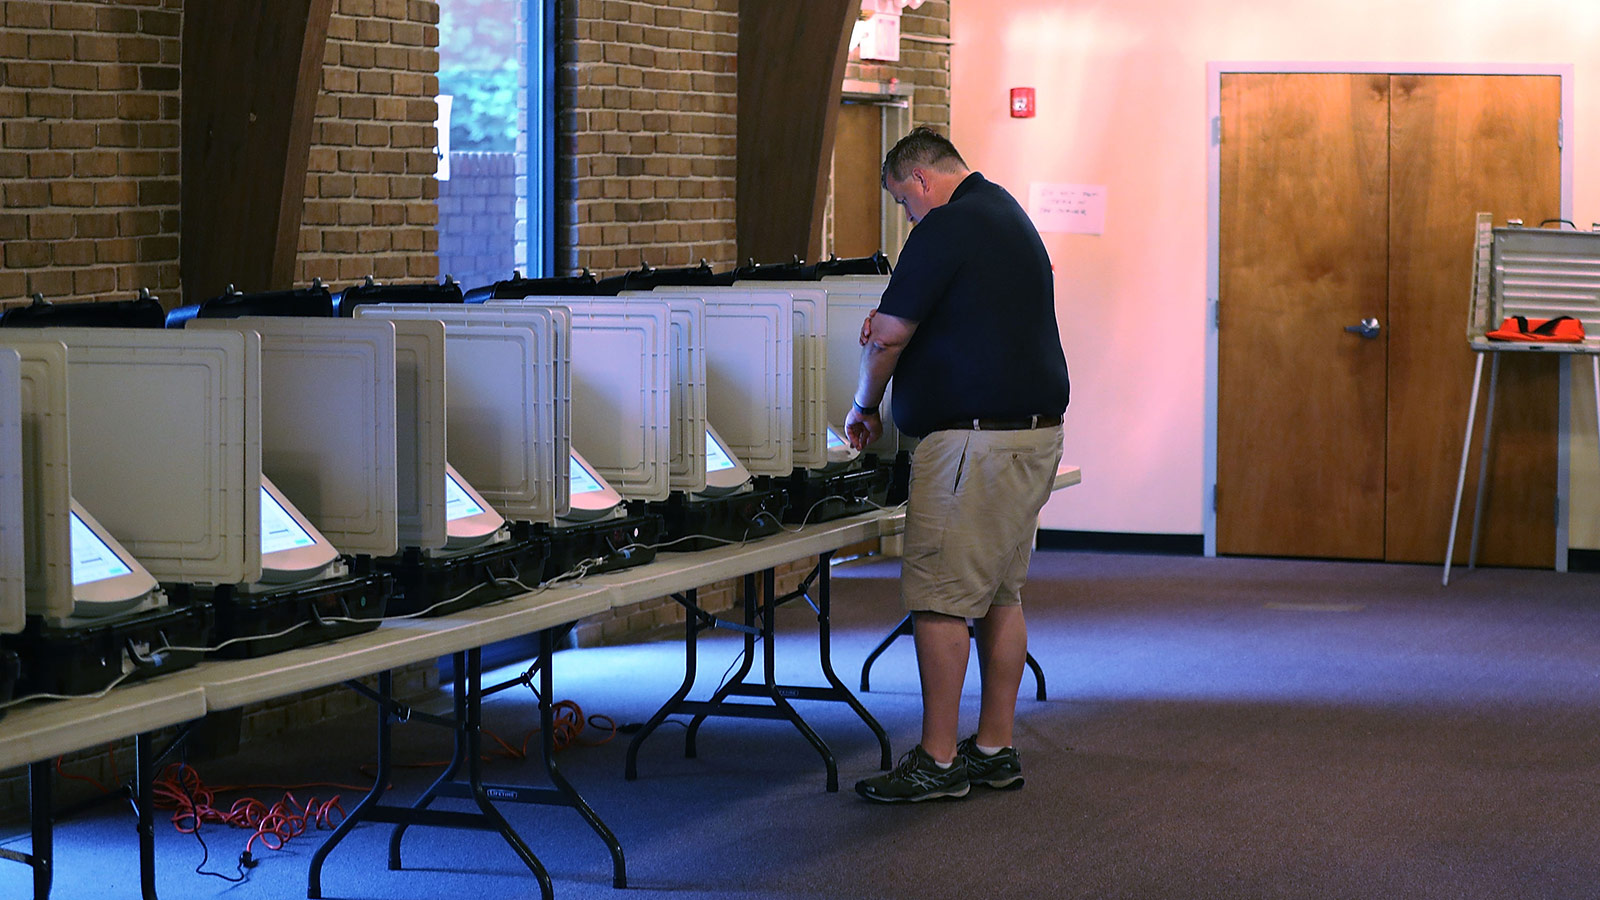 A voter casts his ballot during a special election in Georgia's 6th Congressional District special election at St. Bede's Episcopal Church on June 20, 2017 in Tucker, Georgia.